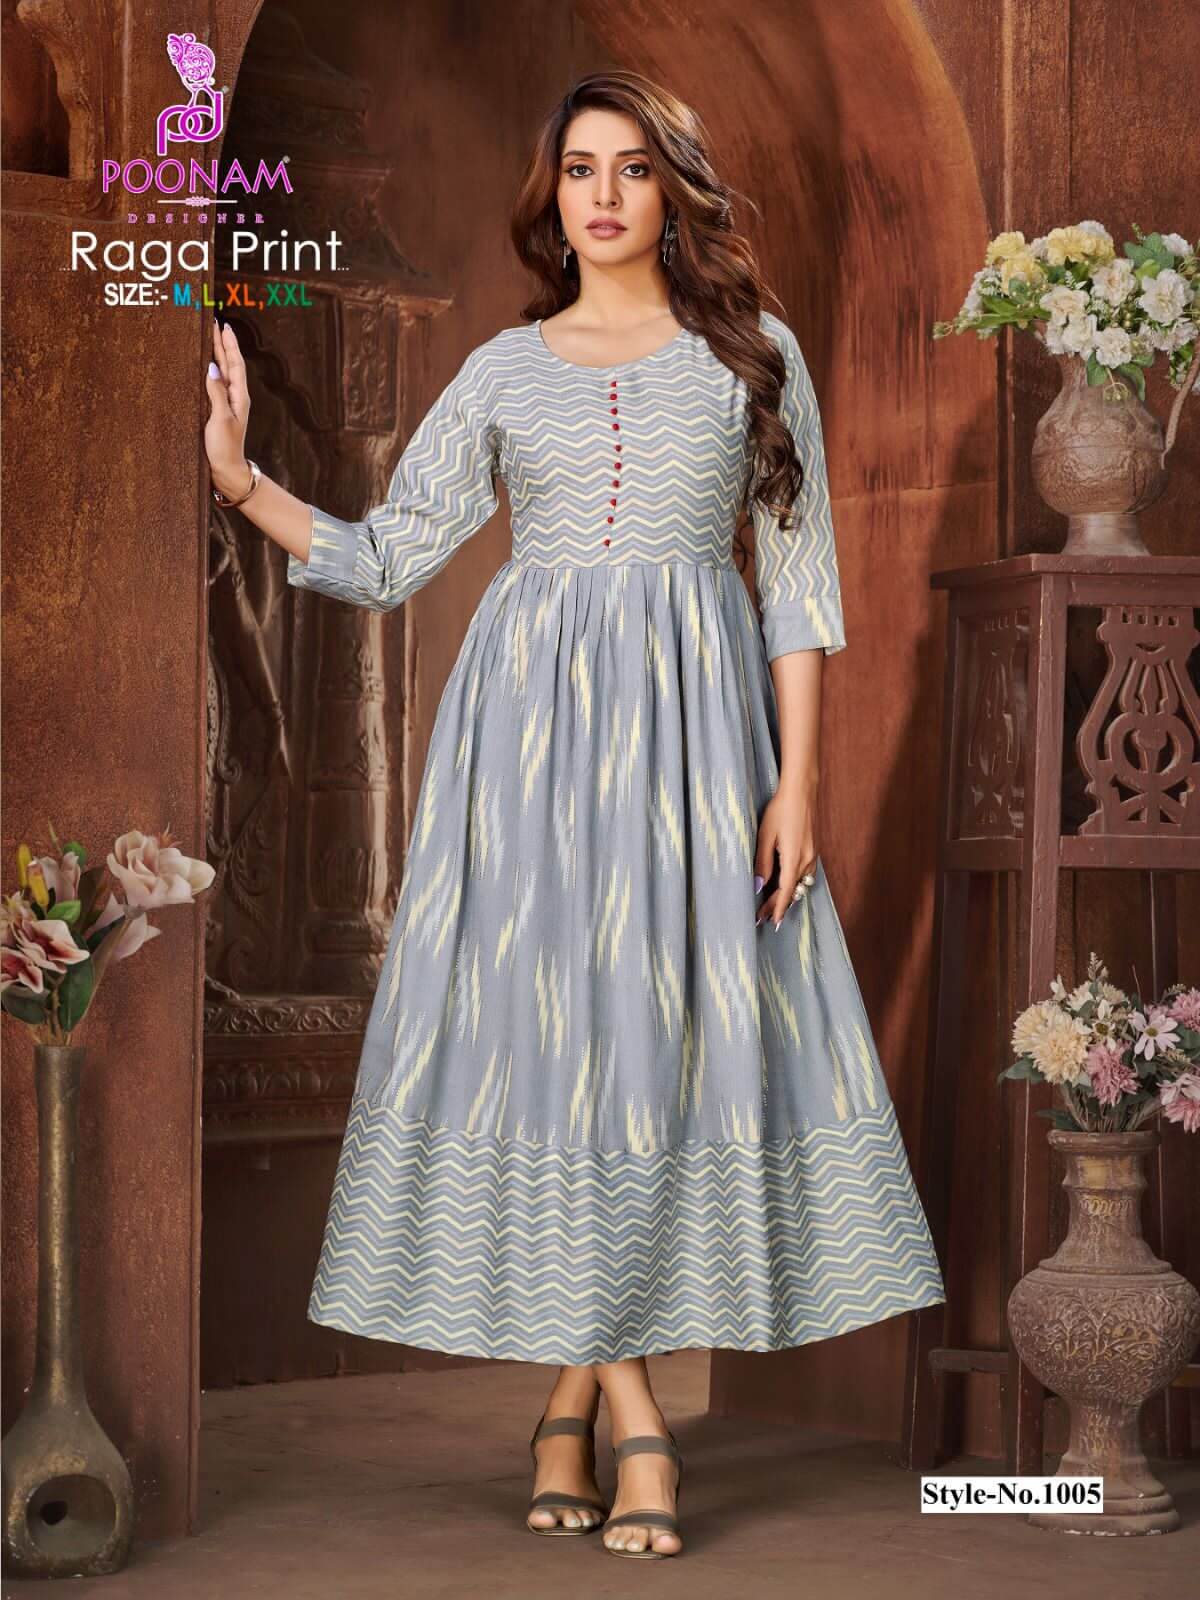 Poonam Raga Print Gowns Catalog collection 7